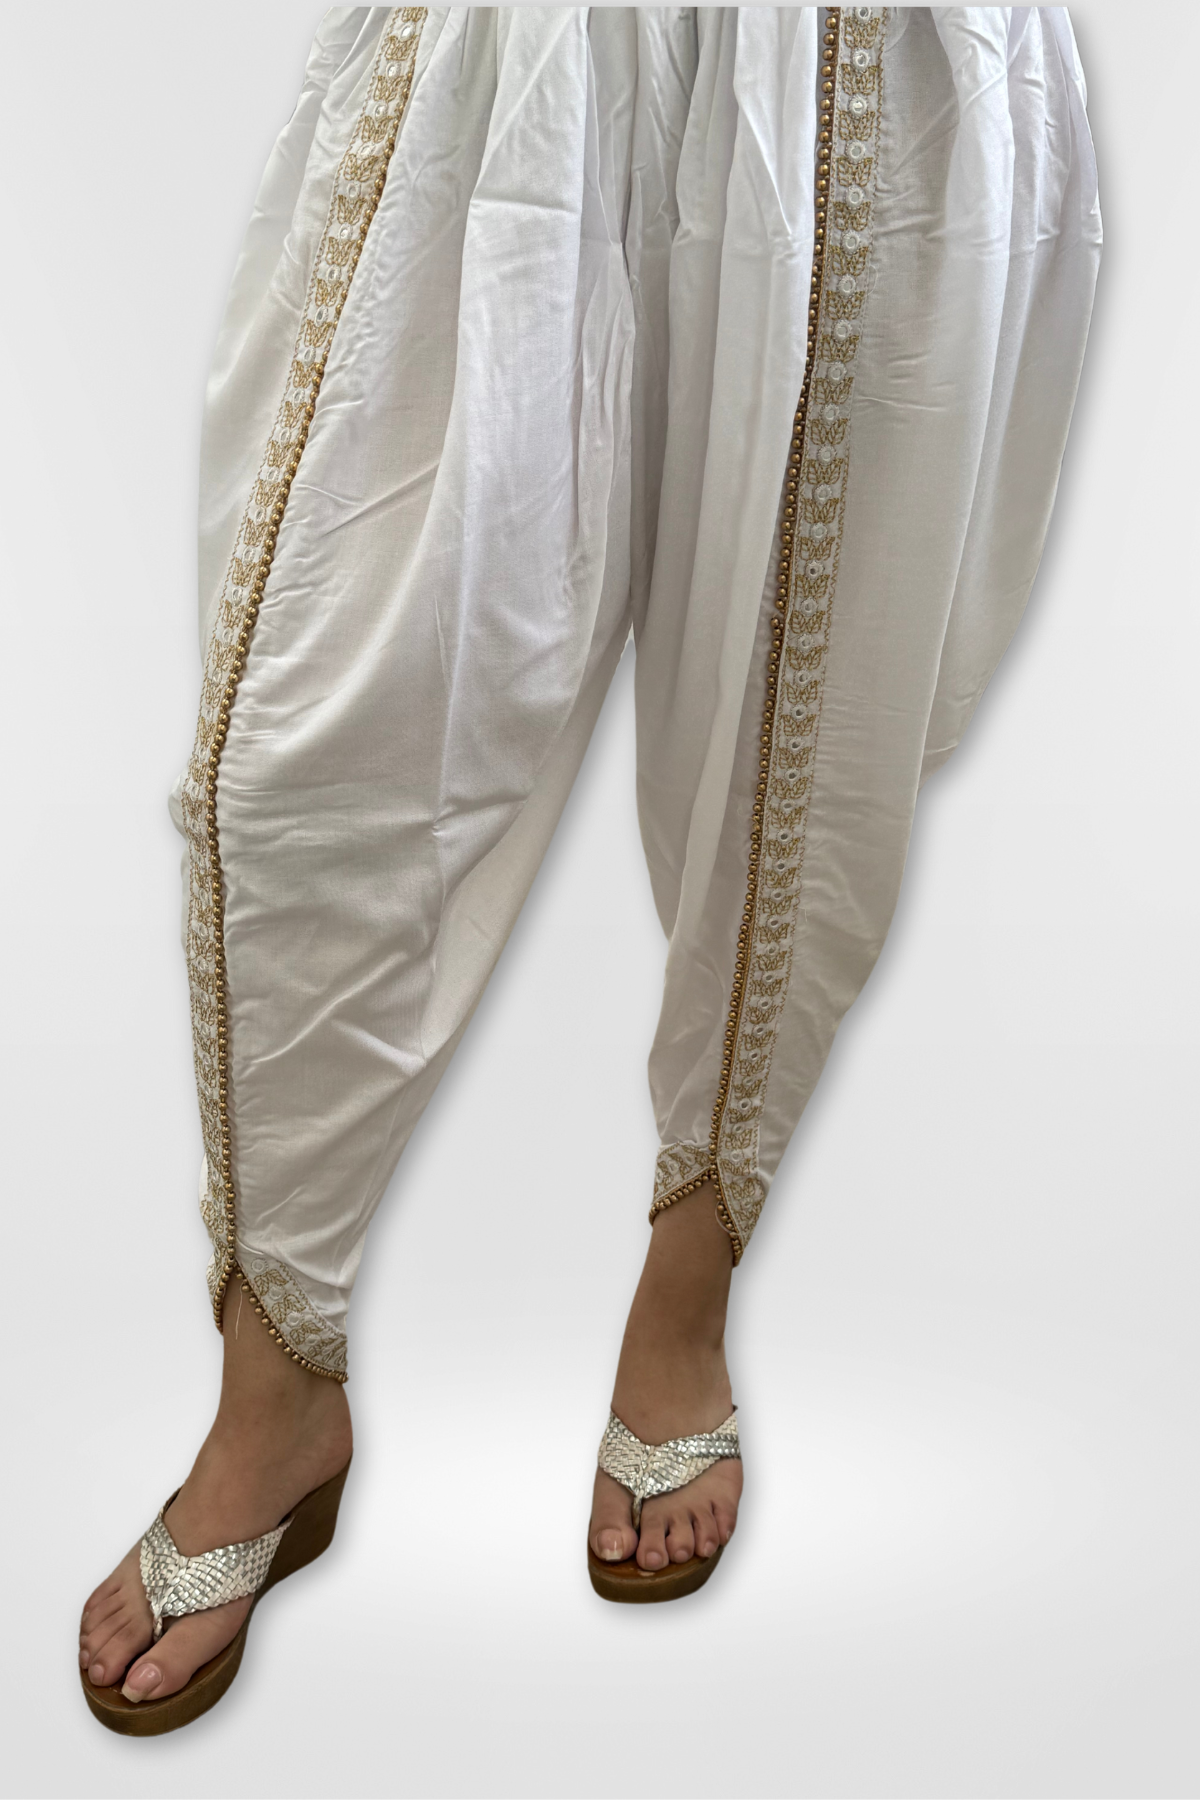 Our Rayon Dhoti Pants feature intricate embroidery and a Golden Pearl Lace.